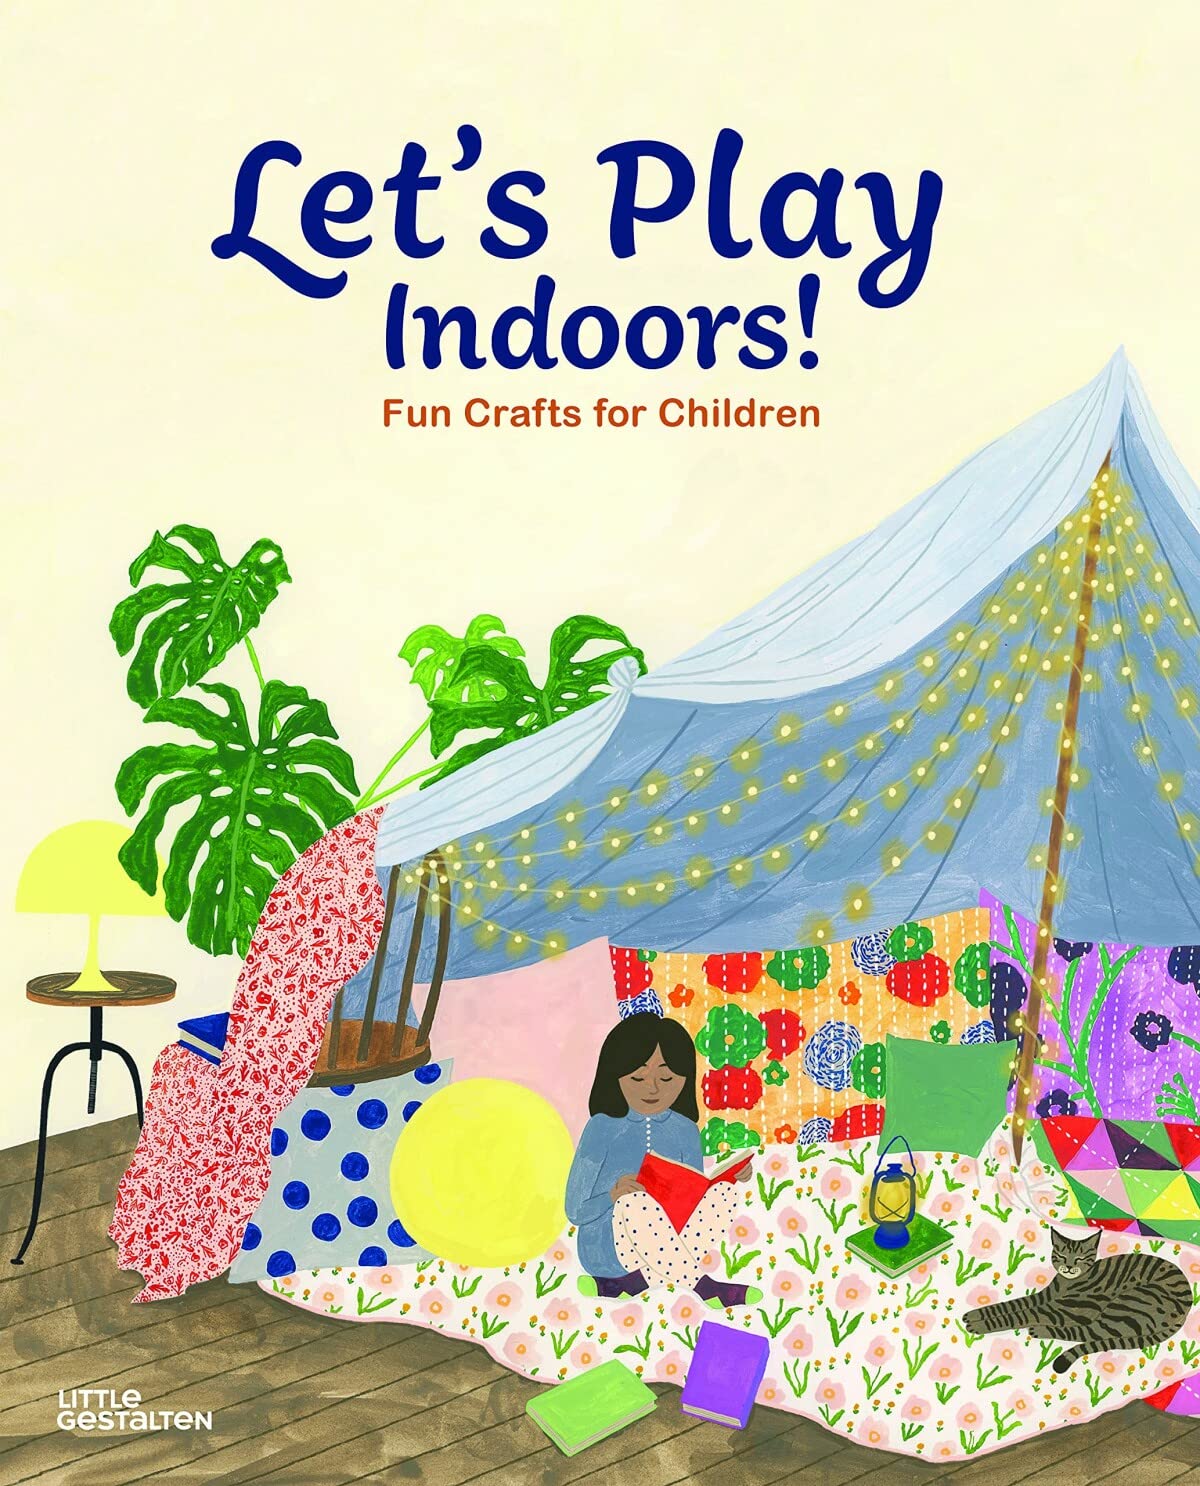 Let's Play Indoors: Fun Crafts for Children